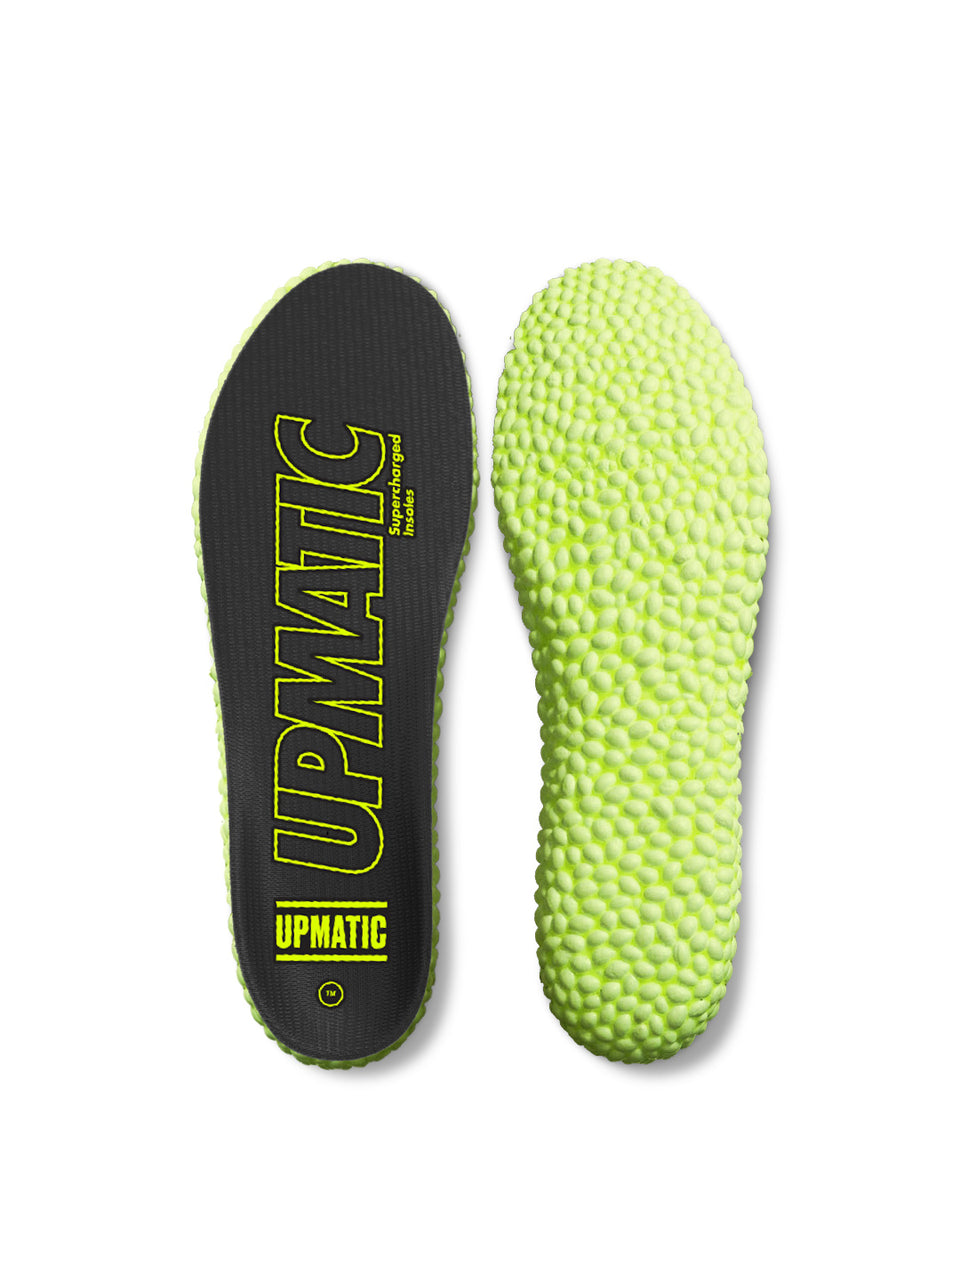 UPMATIC Supercharged Insoles by Rebounce